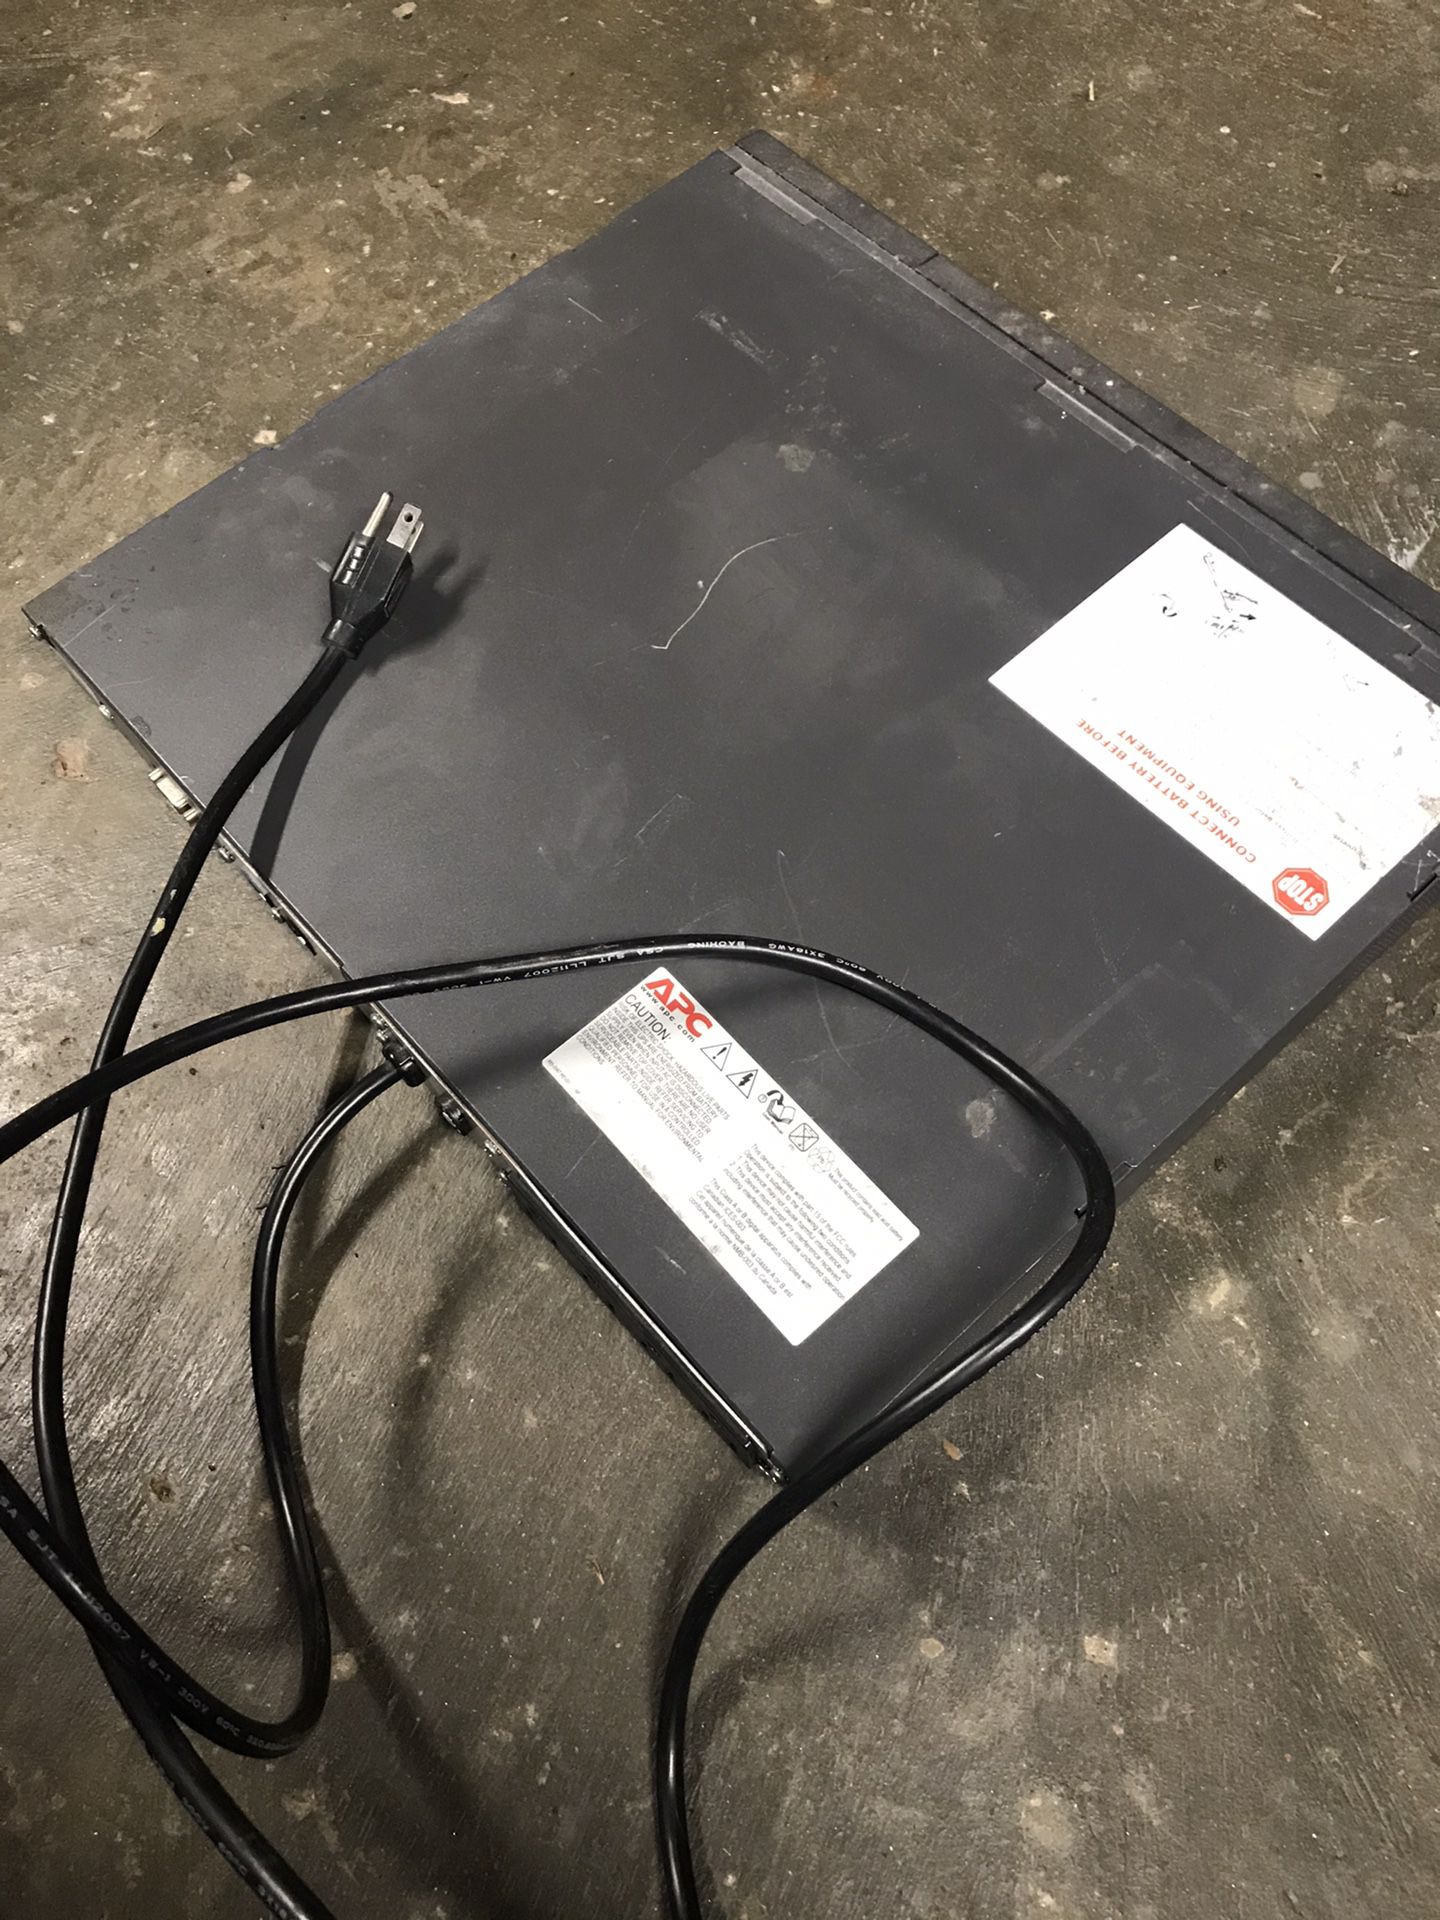 APC UPS battery back up (not working)